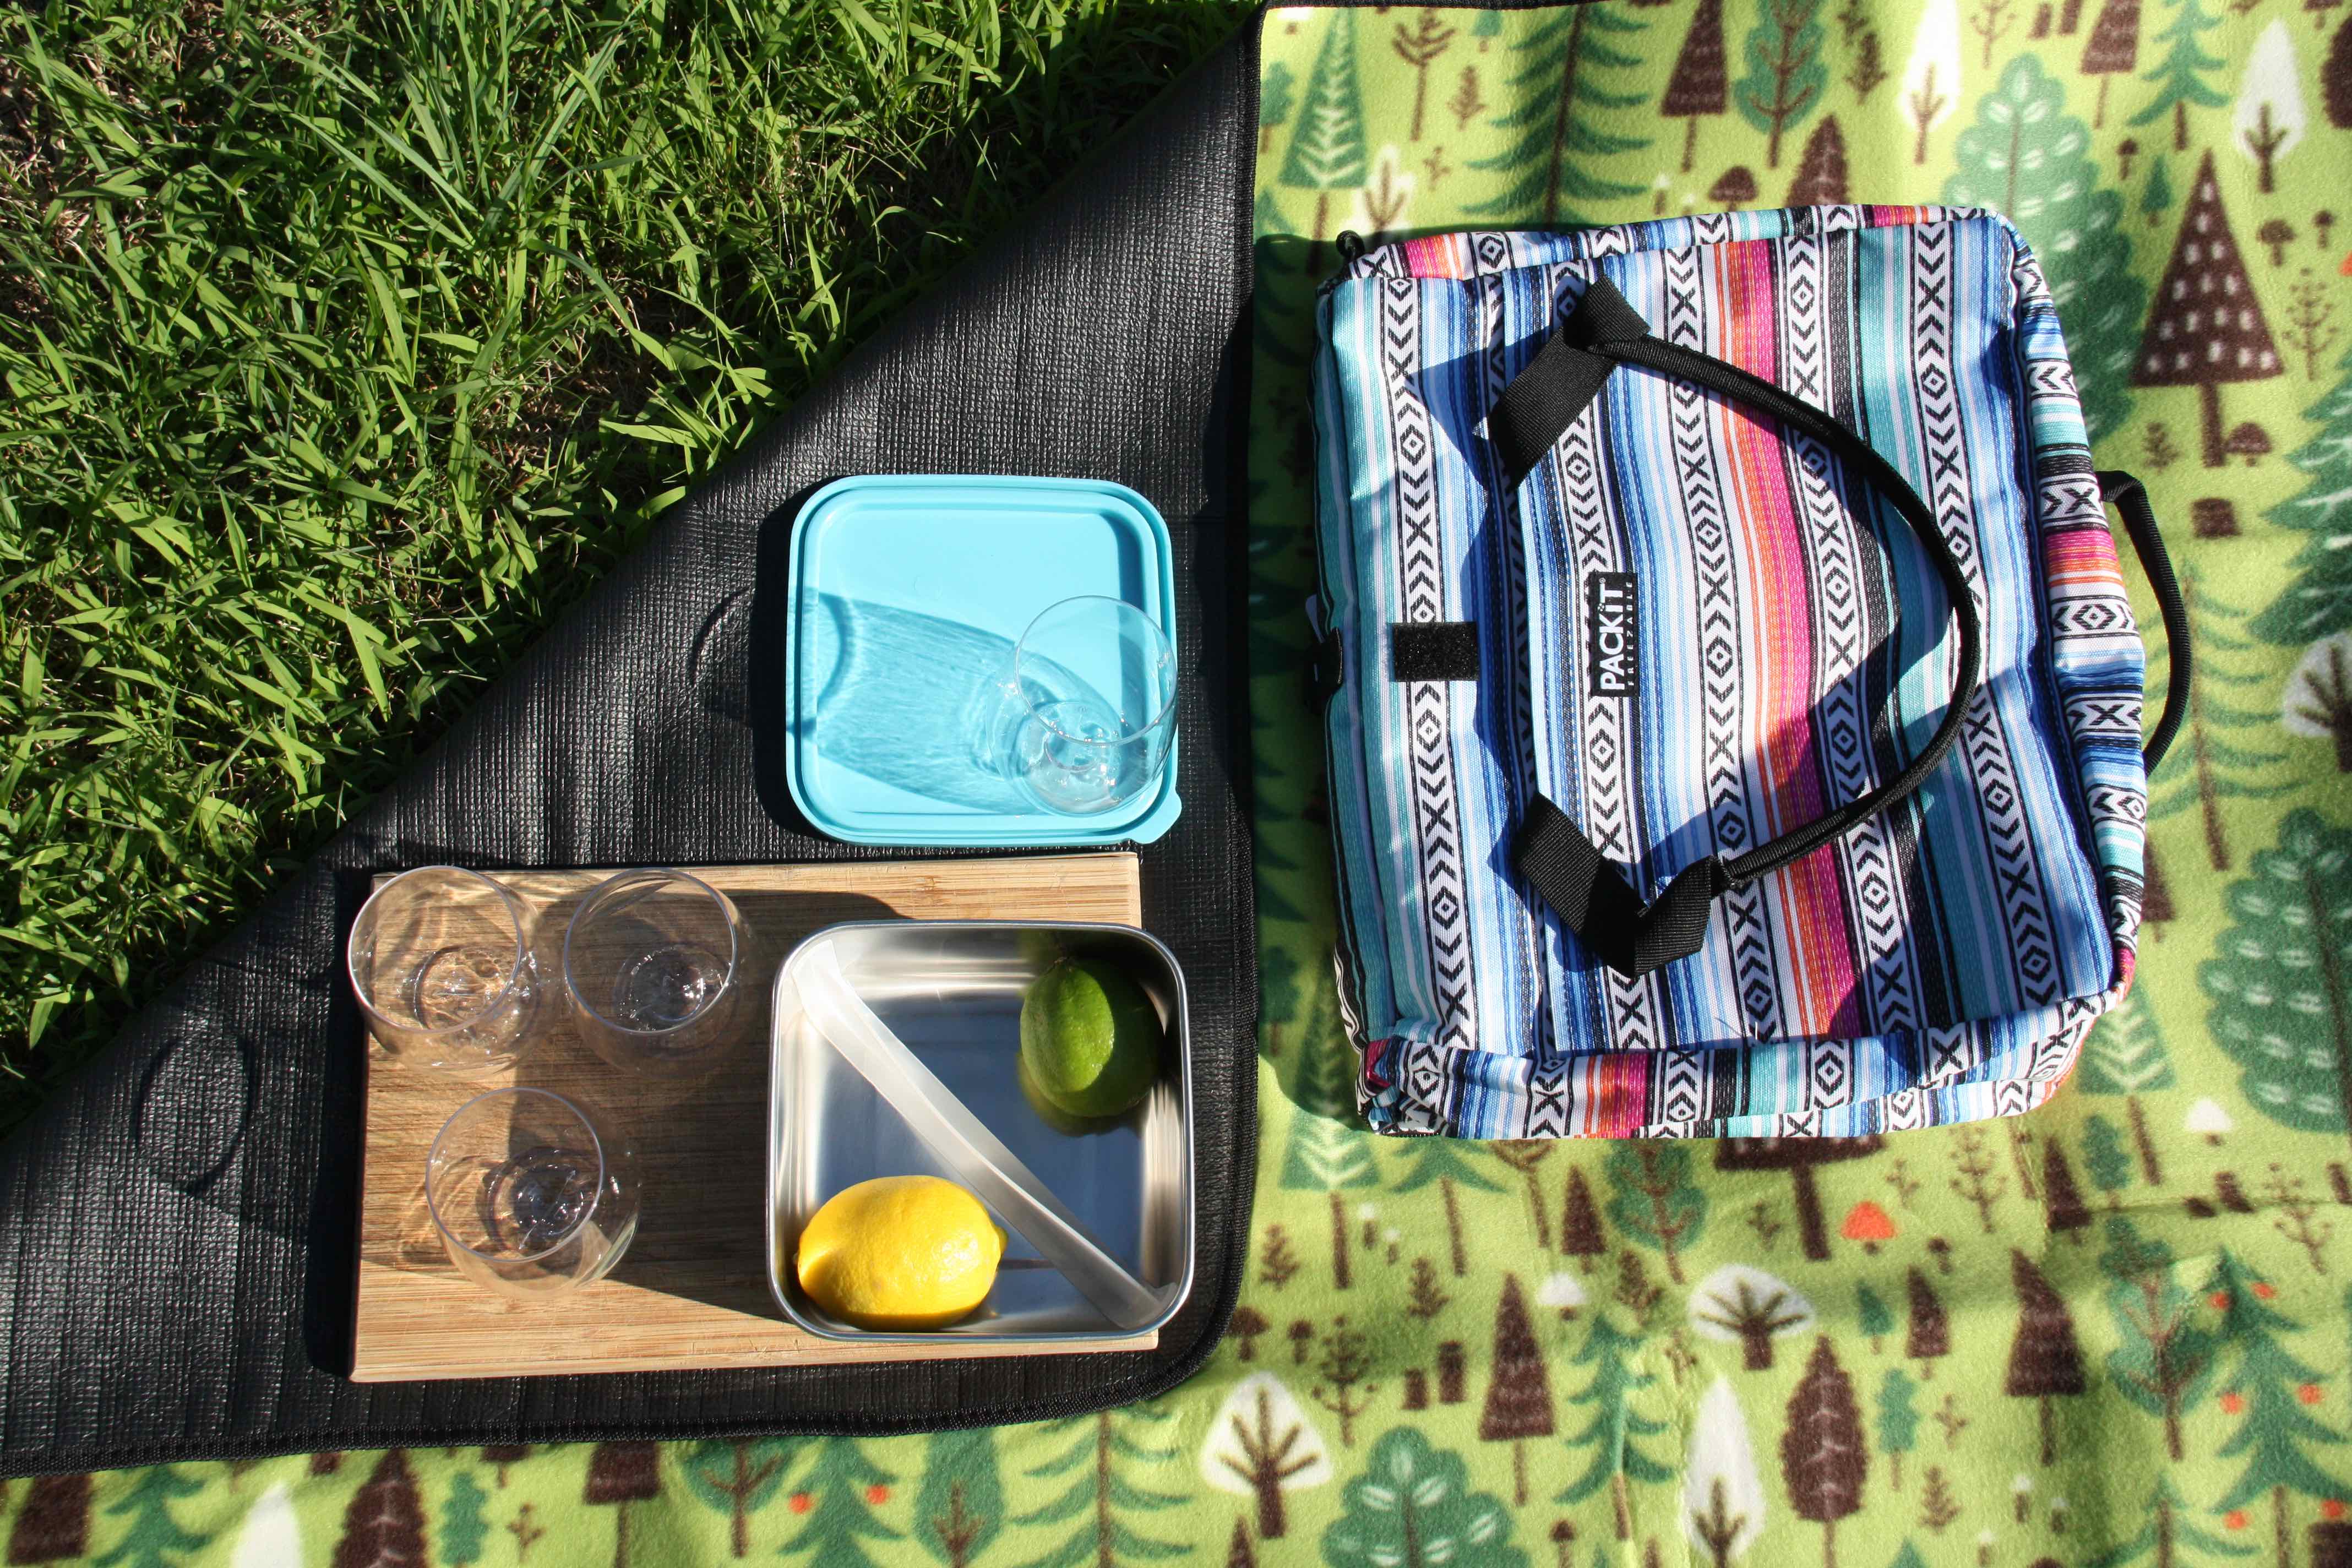 Pack Up Your Picnic With 4 Must-Have Product Picks